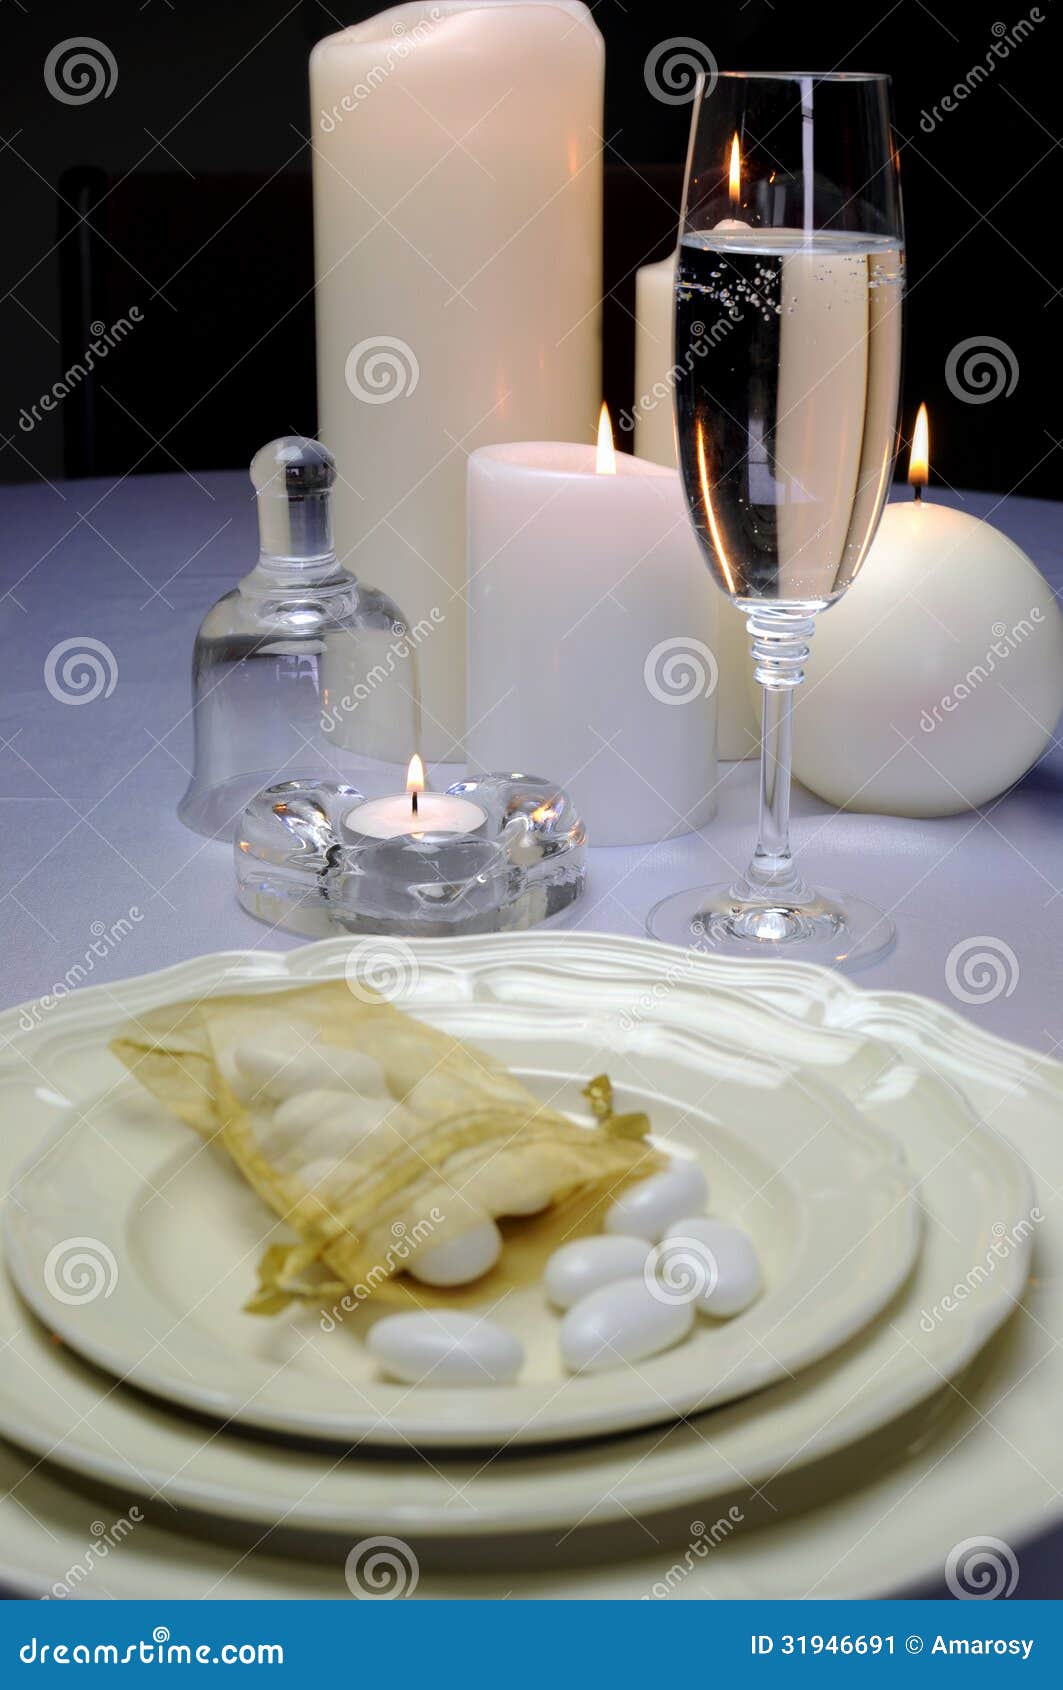 wedding breakfast dining table setting with sugar almonds on fina china with champagne flute